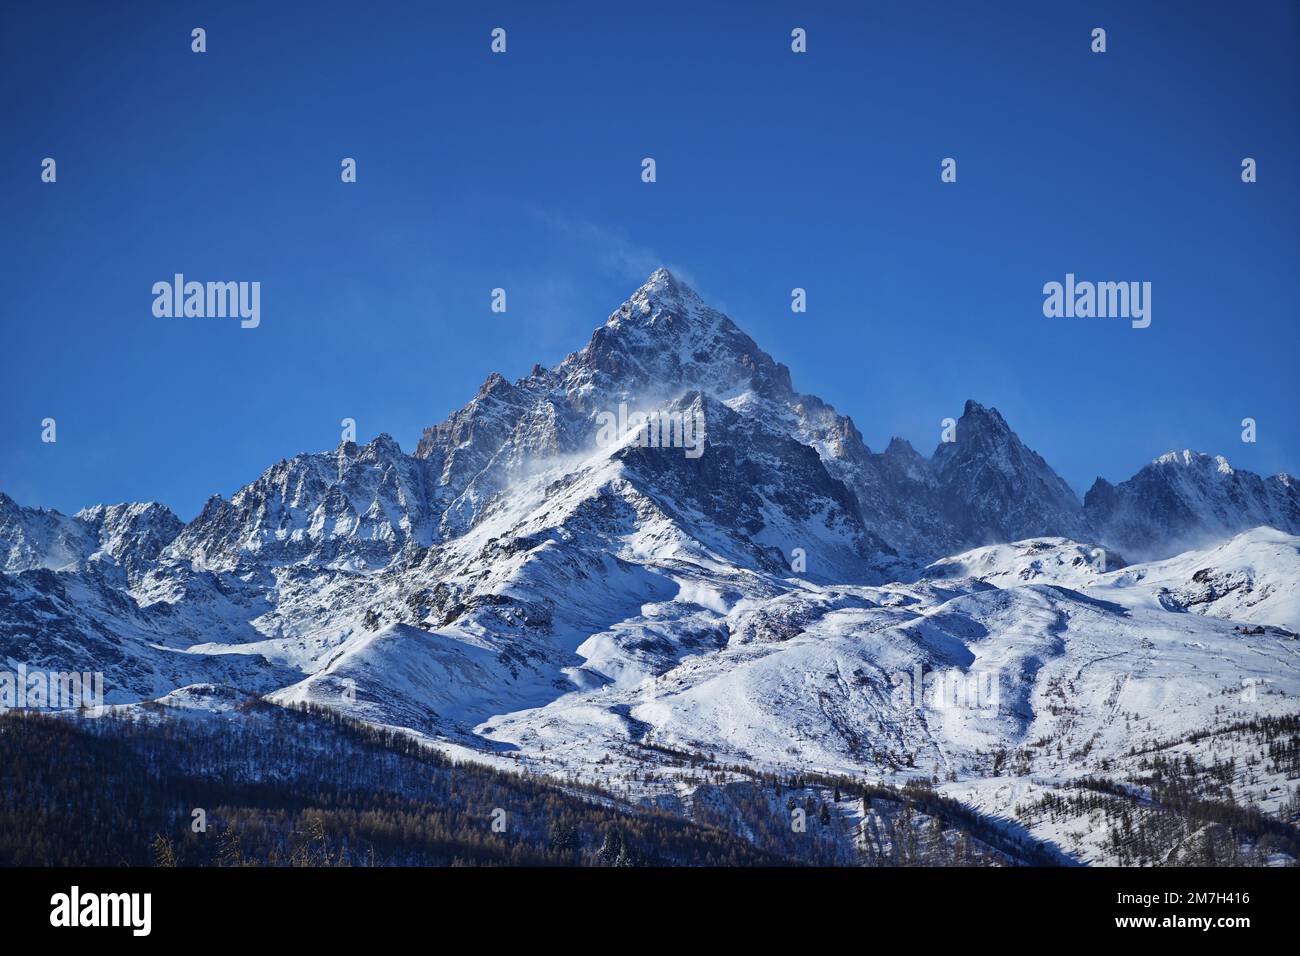 Monviso, 3,842 meters, is the king of the Alps, imposing and majestic in its snowy beauty. A breathtaking view from the village of Ostana in Piedmont, Stock Photo